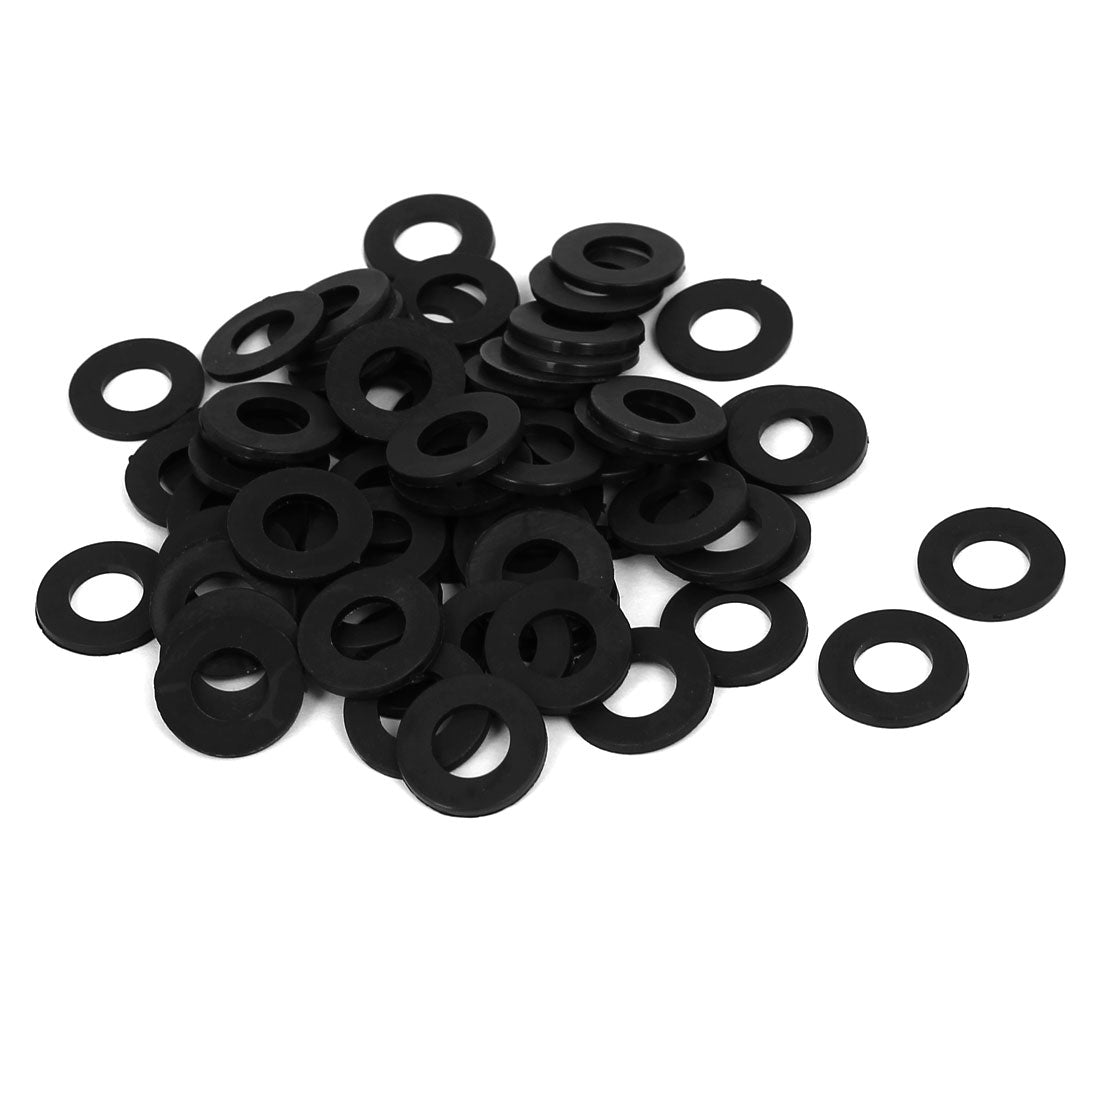 Uxcell Uxcell M5 x 10mm x 1mm Nylon Flat Pads Insulating Washers Gaskets Fastener 100PCS